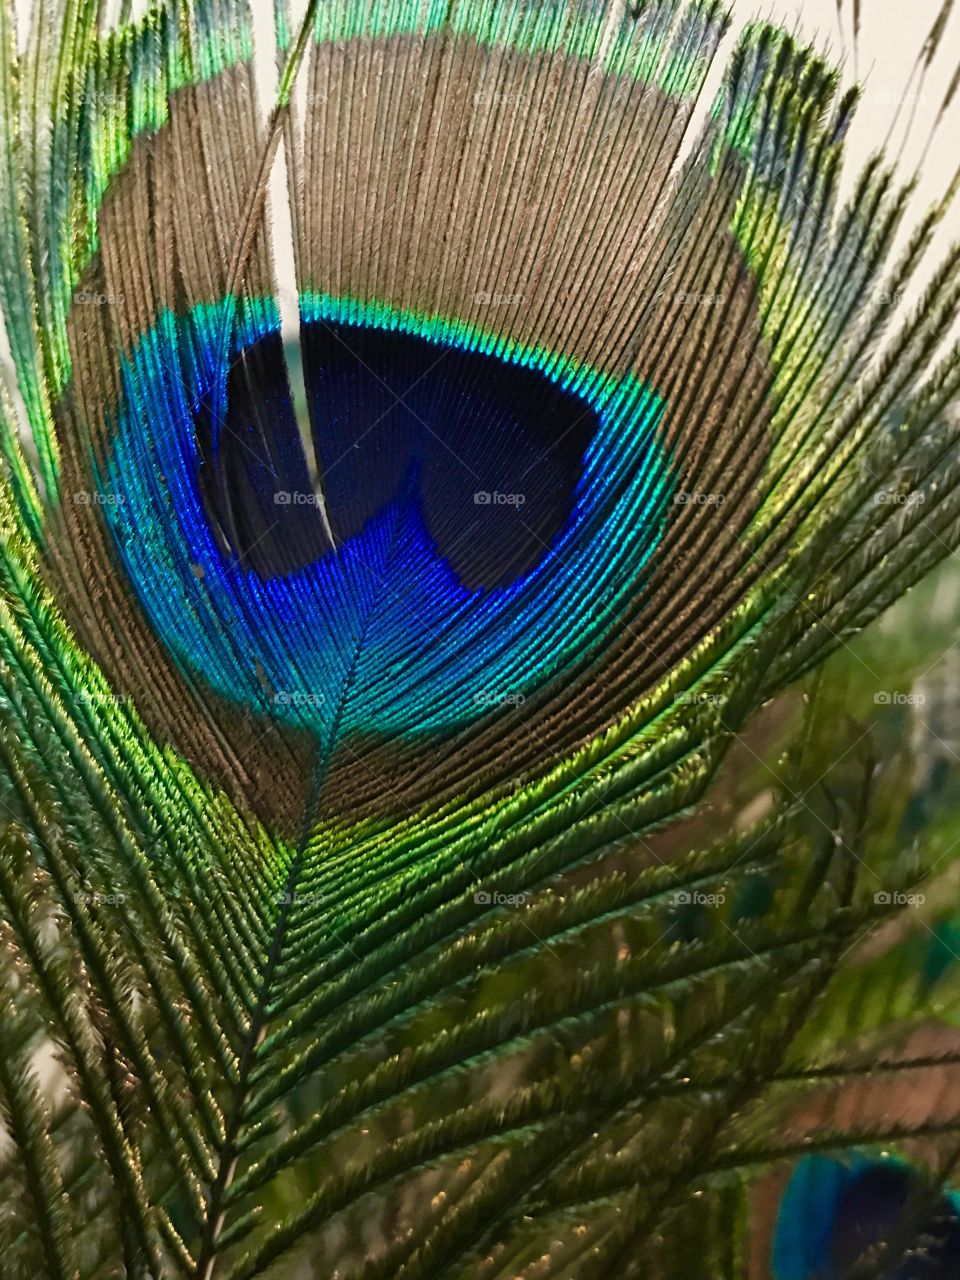 Feathers on feathers